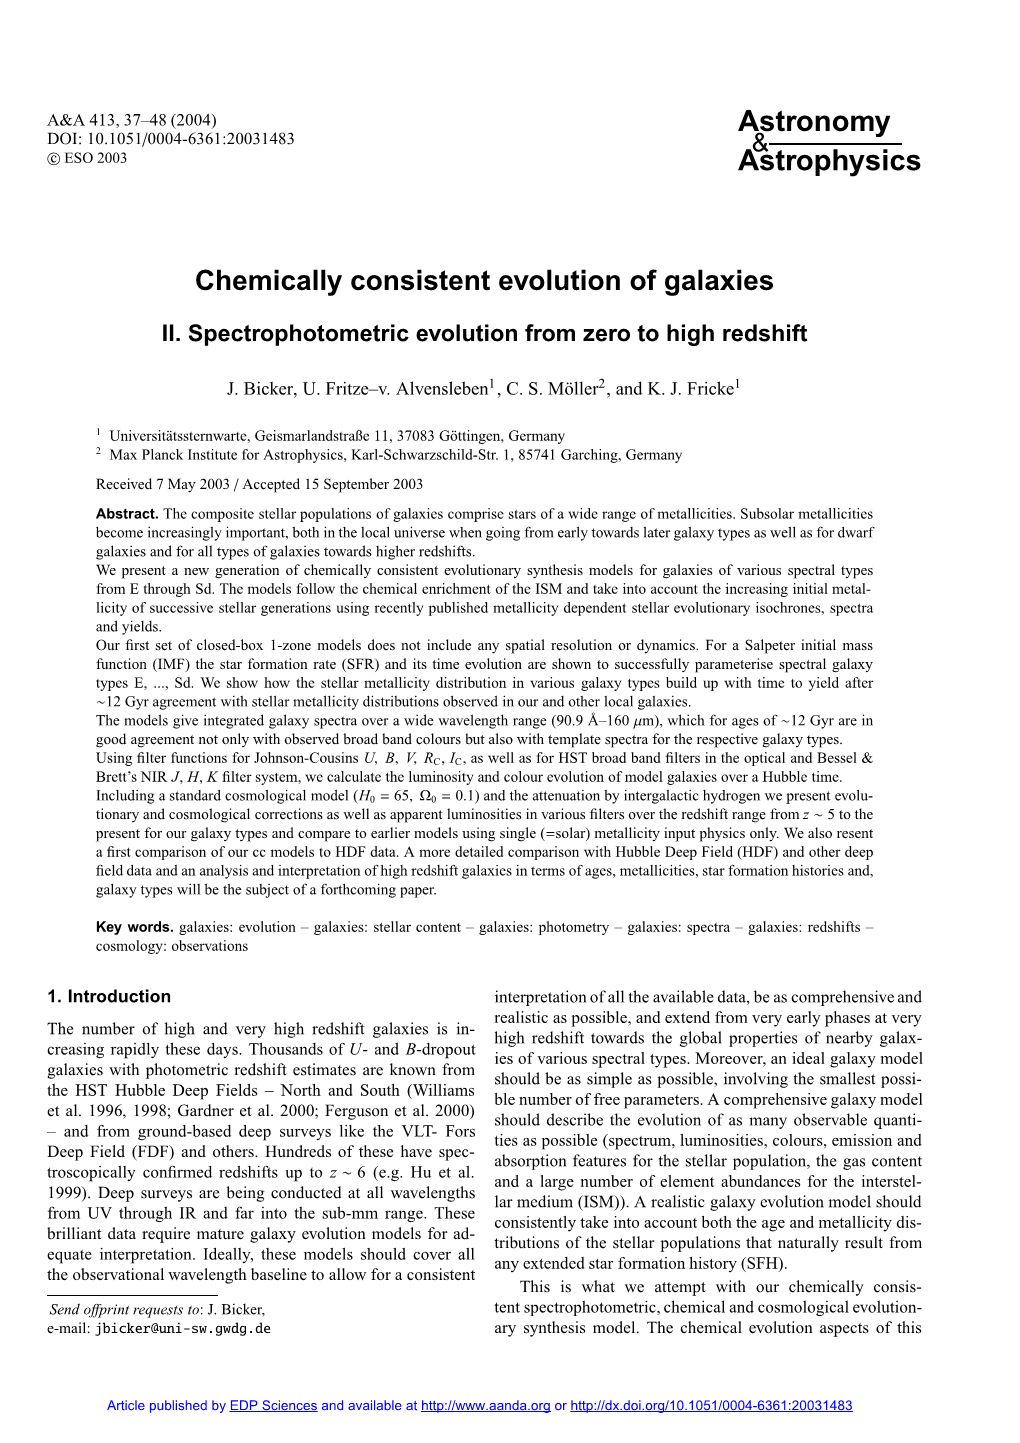 Chemically Consistent Evolution of Galaxies